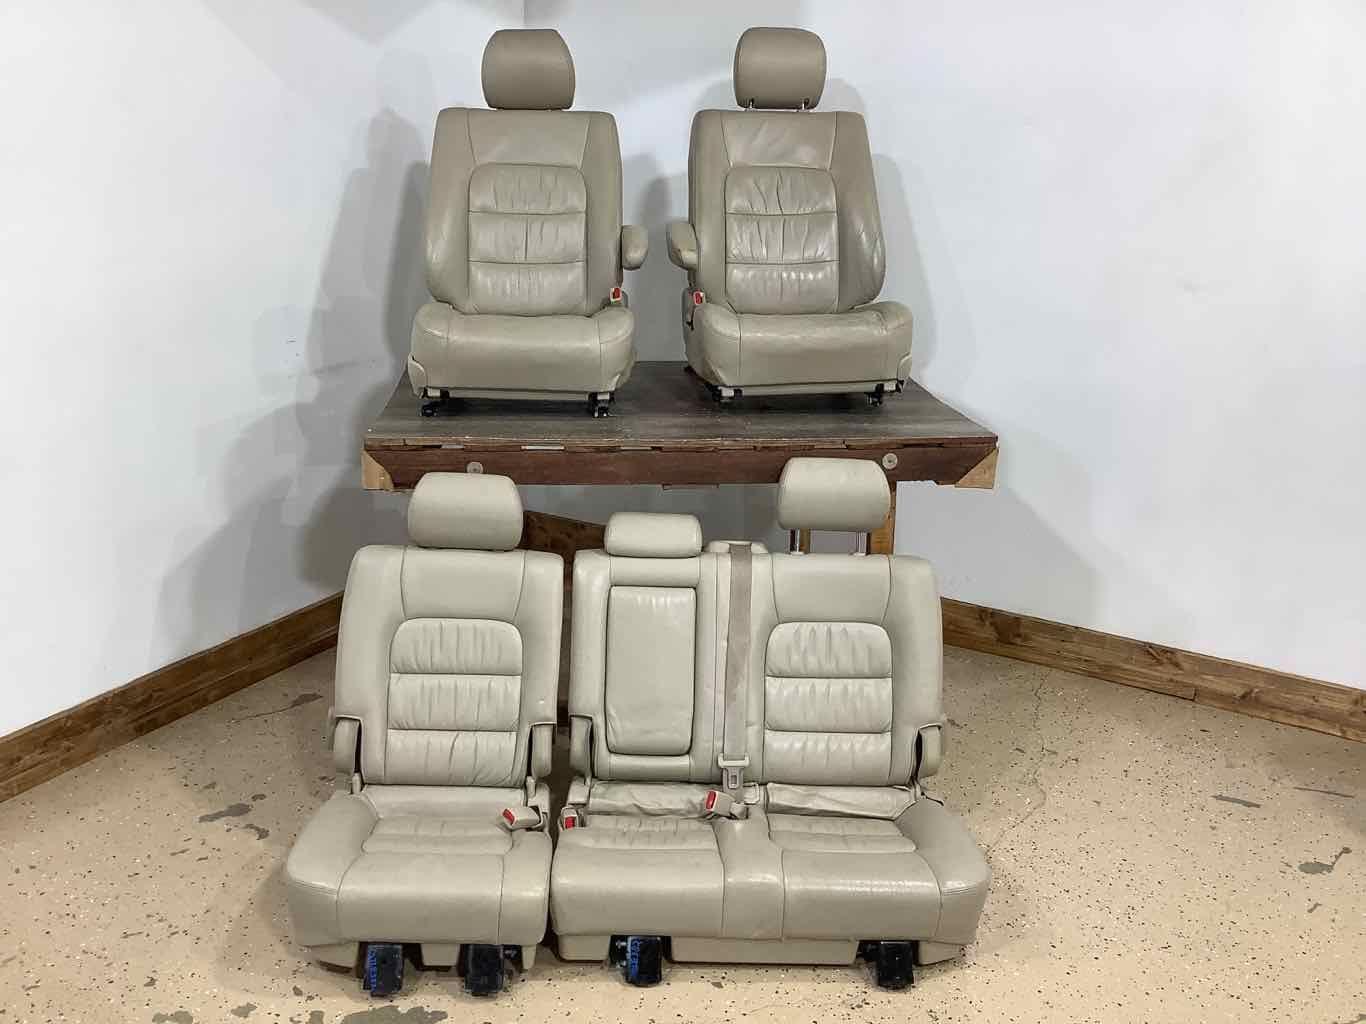 03-07 Lexus LX470 1ST & 2ND Row Leather Seat Set (Ivory LG00) See Notes